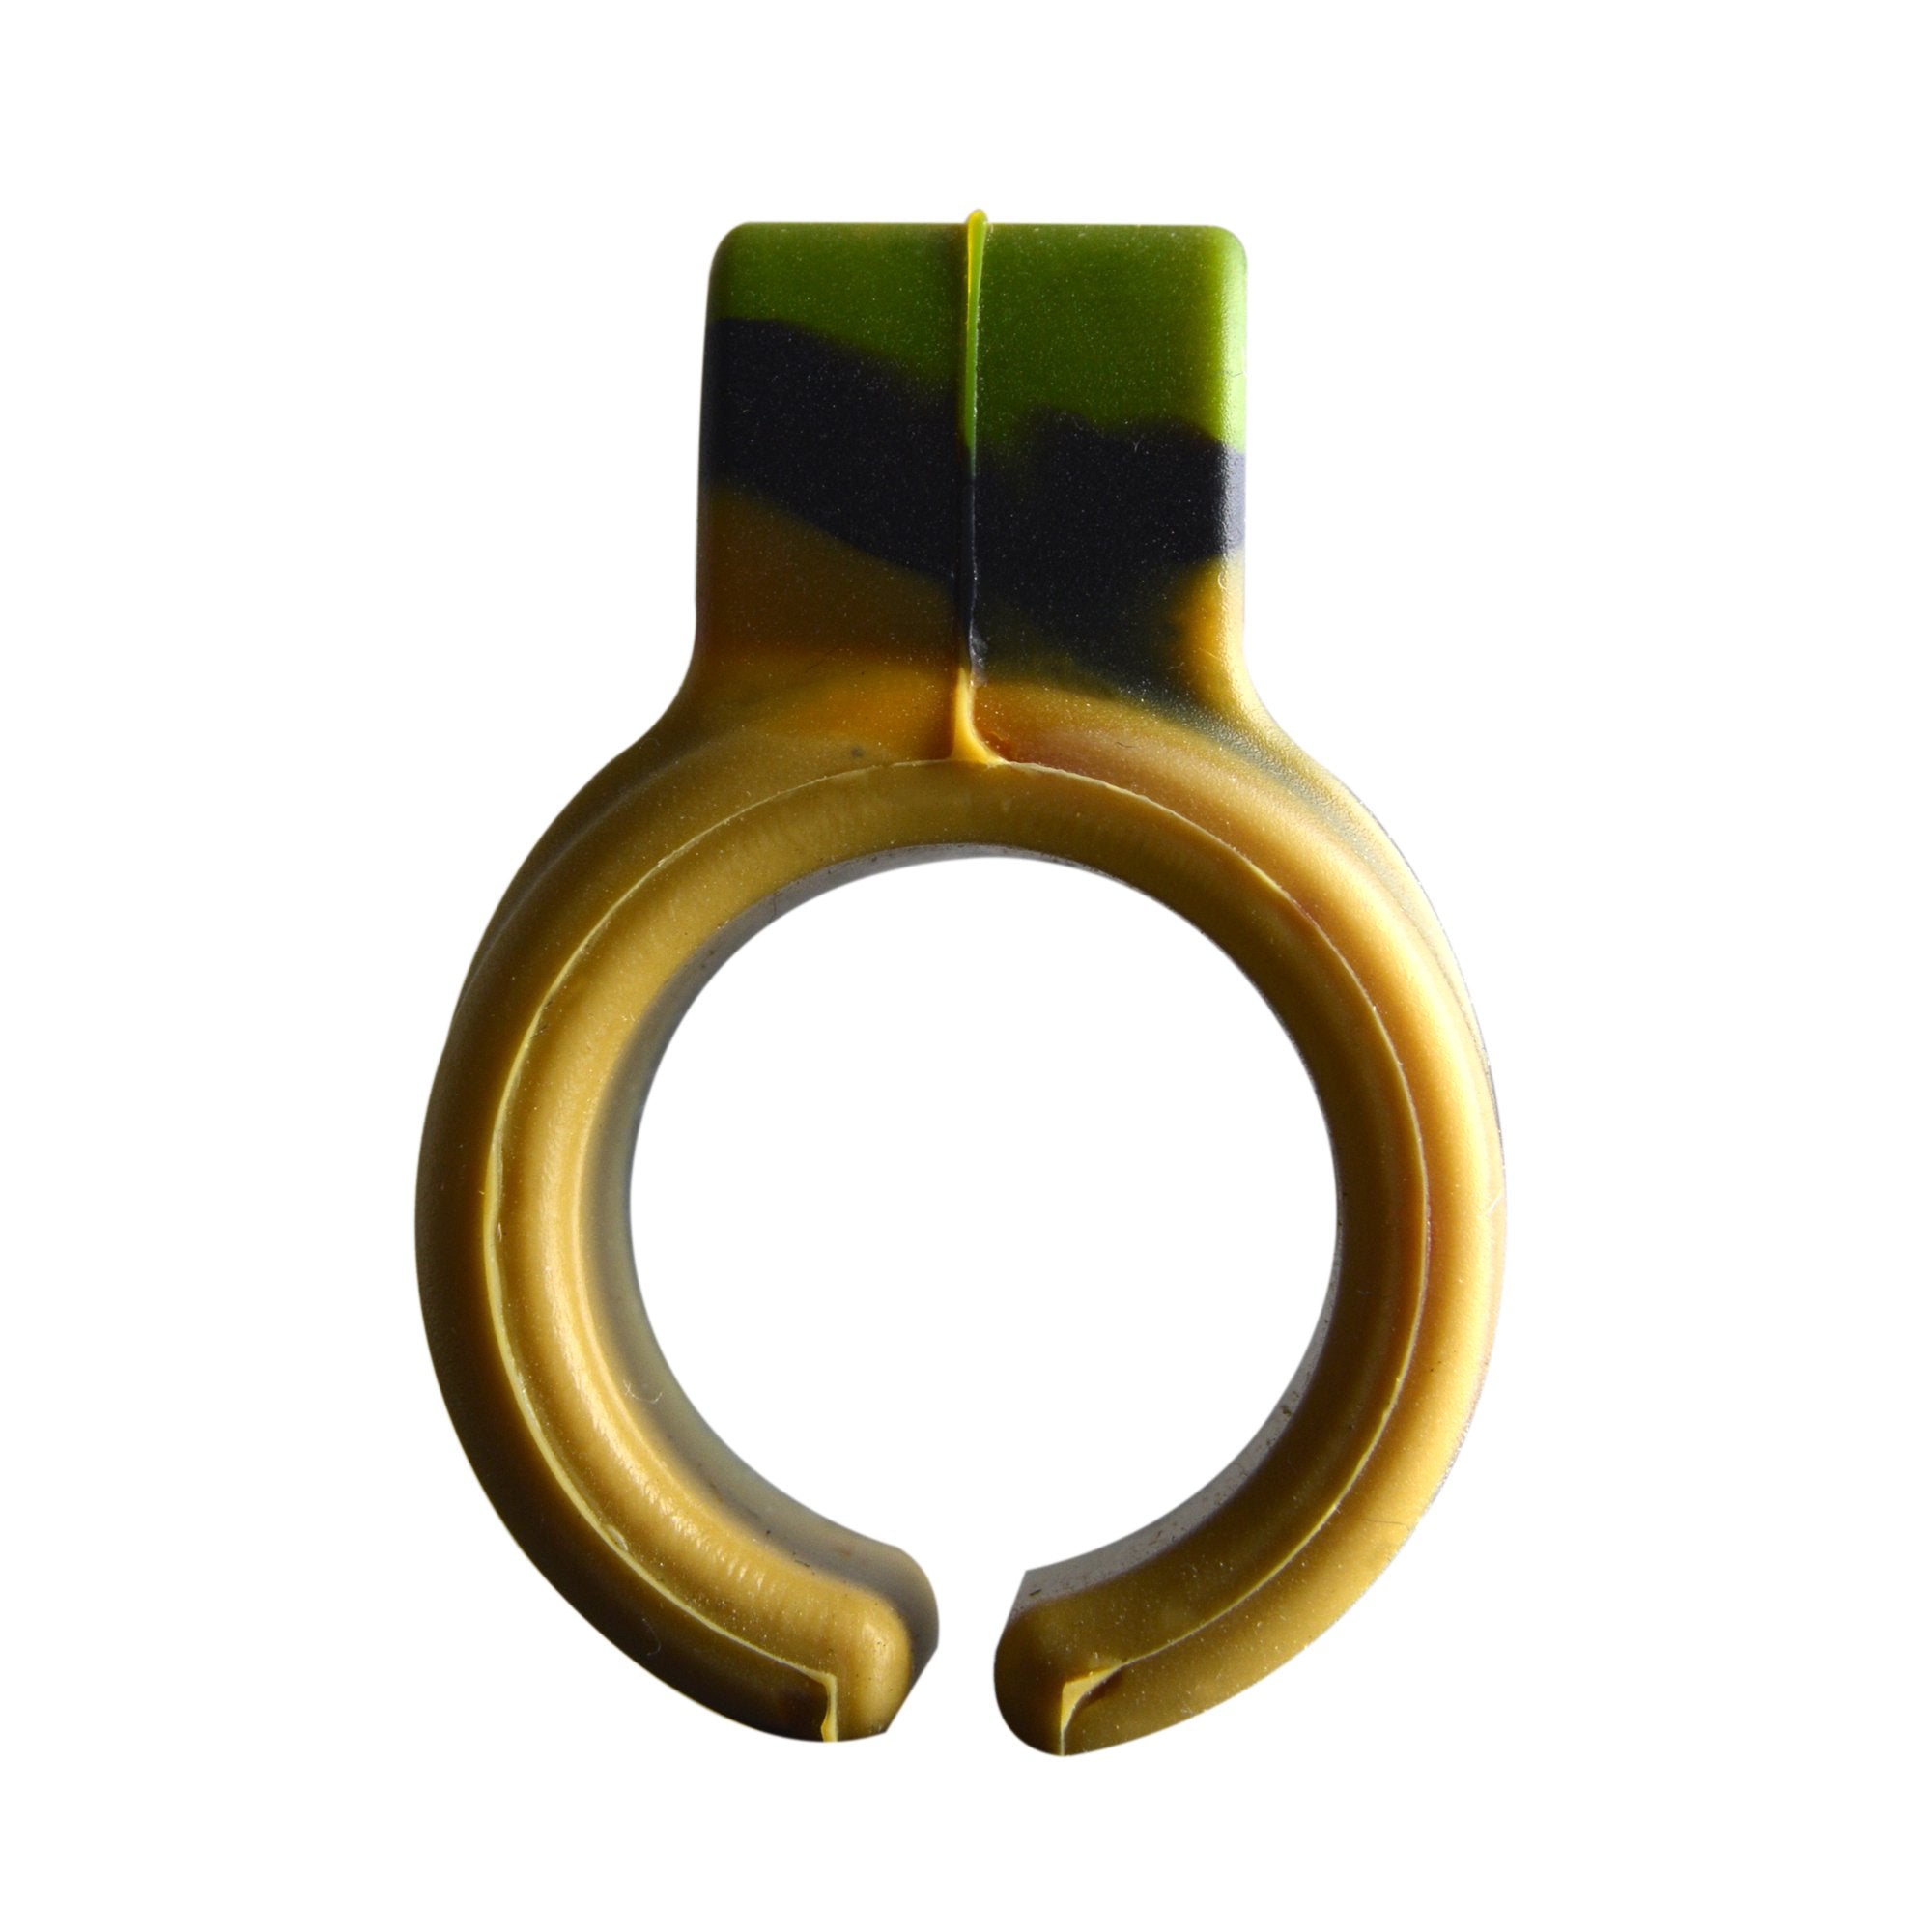 KING PALM | Blunt Holder Rings | Silicone - 50 Count - 7